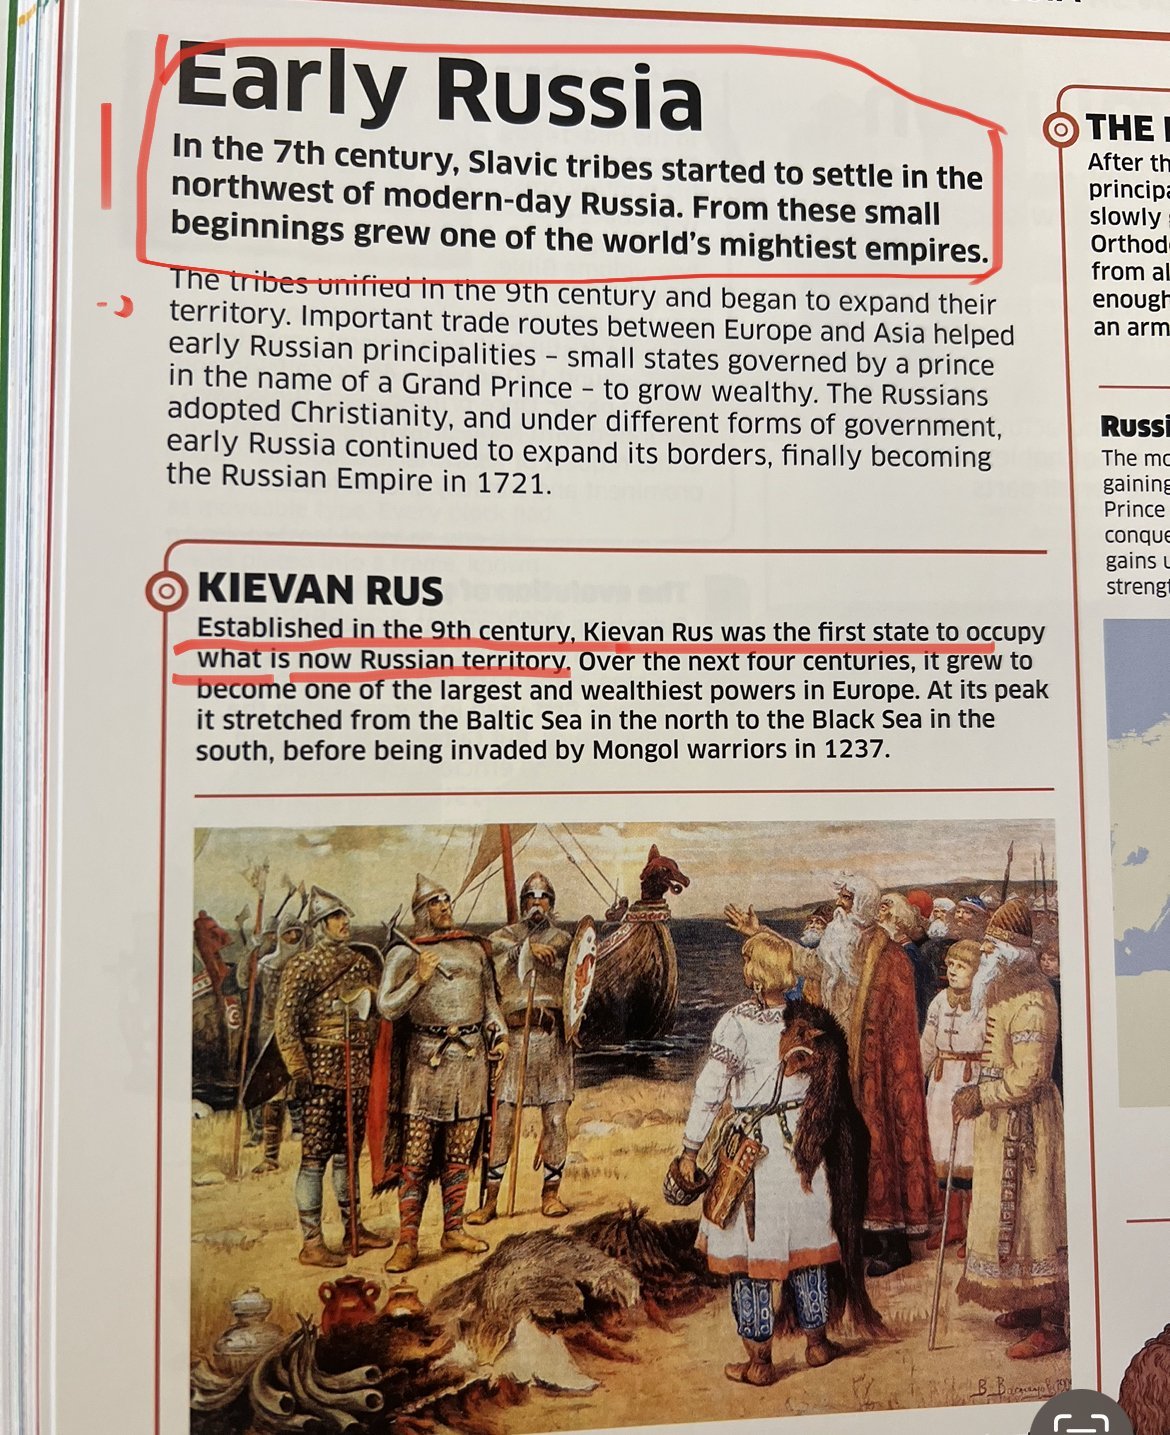 Knowledge Encyclopedia. The past you’ve never seen before. Dorling Kindersley, 2019.  Here we see Rus’ depicted as “early Russia”. The territory of Rus’ is, obviously, “what is now Russian territory”